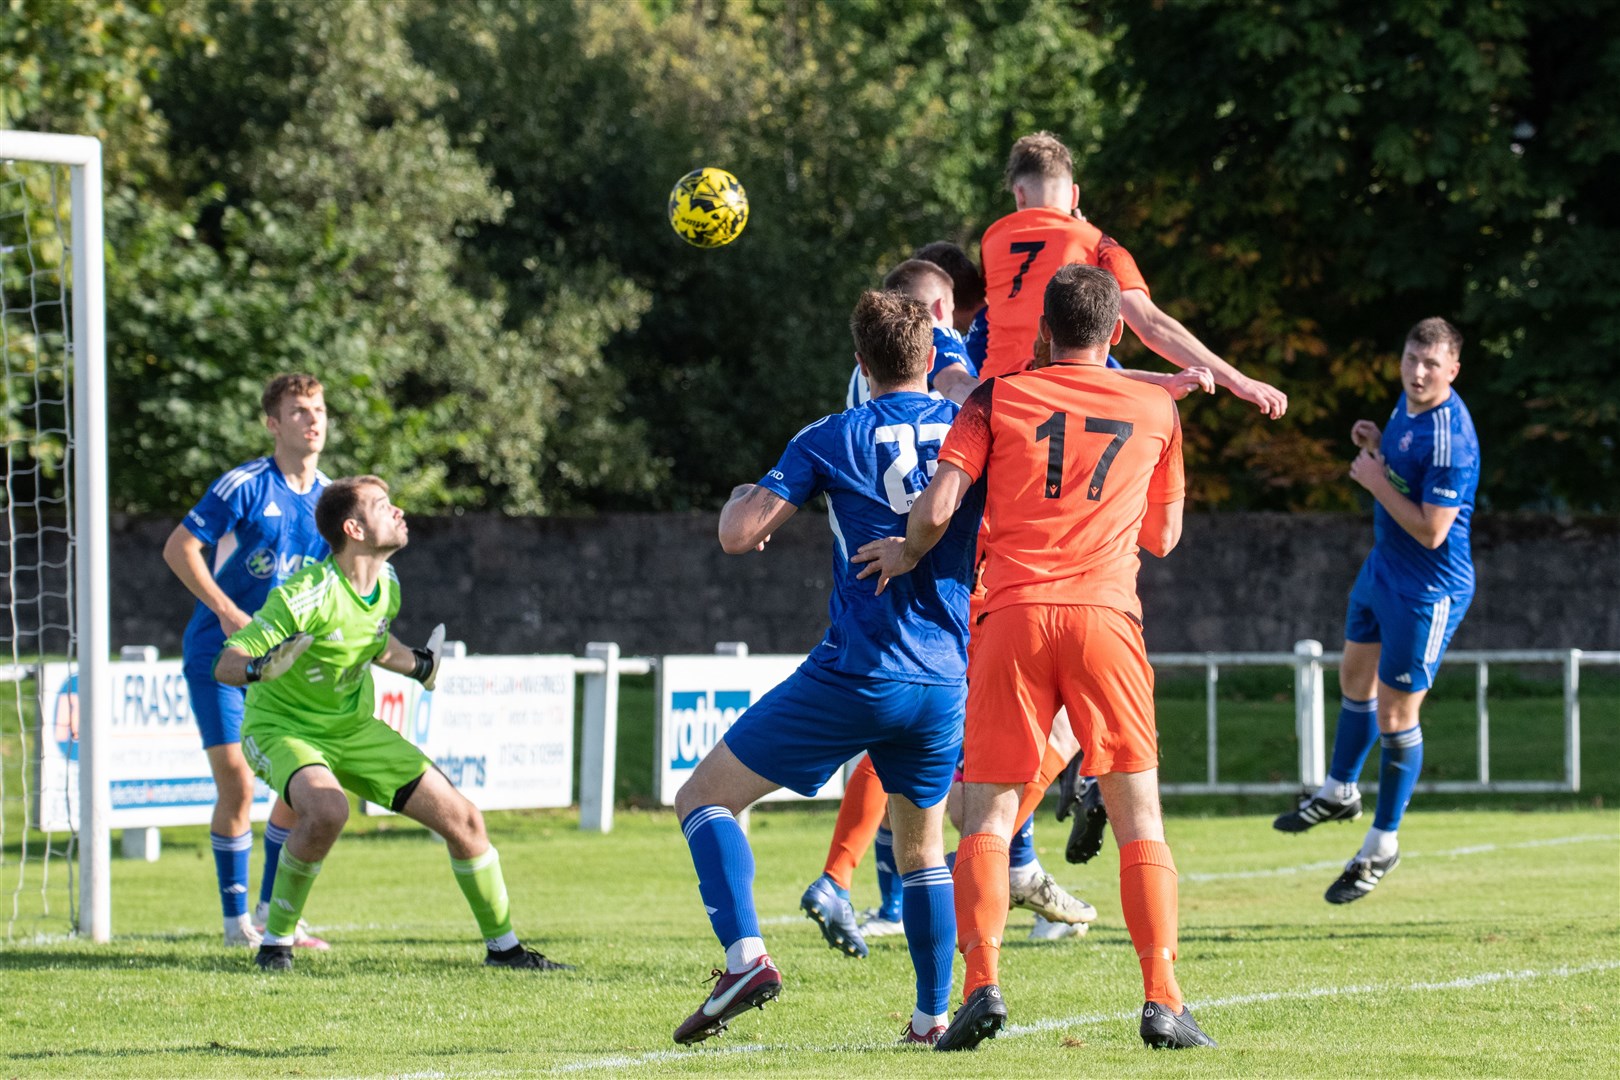 Rothes' Ben Johnstone #7 rises the highest to head home the only goal of the game. ..Rothes FC (1) vs Lossiemouth FC (0) - Highland Football League 23/24 - Mackessack Park, Rothes 16/09/2023...Picture: Daniel Forsyth..